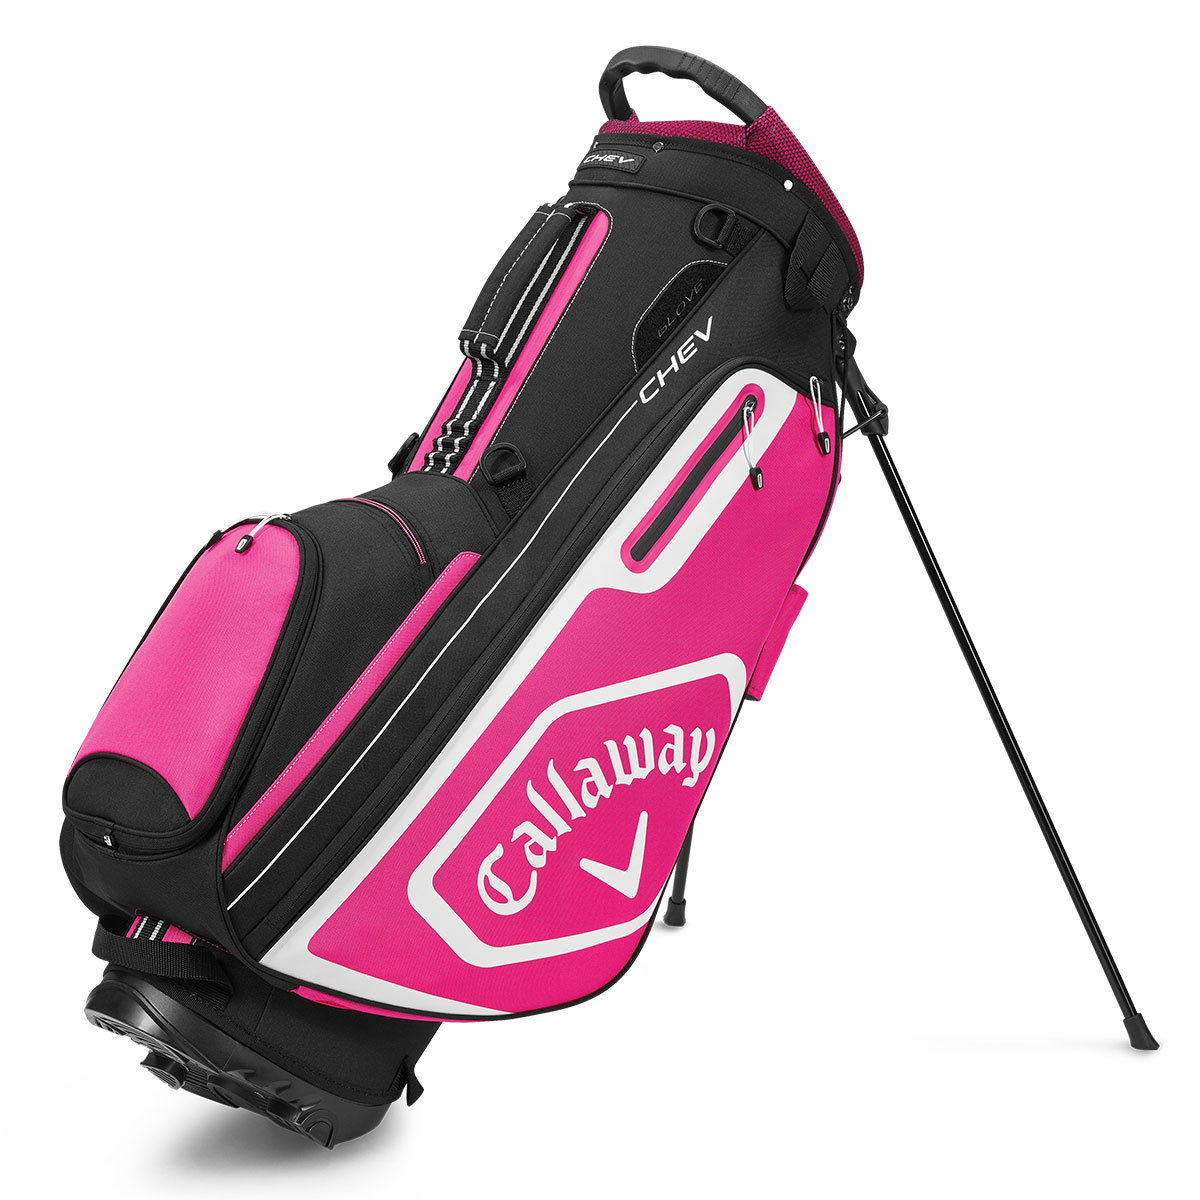 Callaway Golf Chev Stand Bag 2020 from american golf